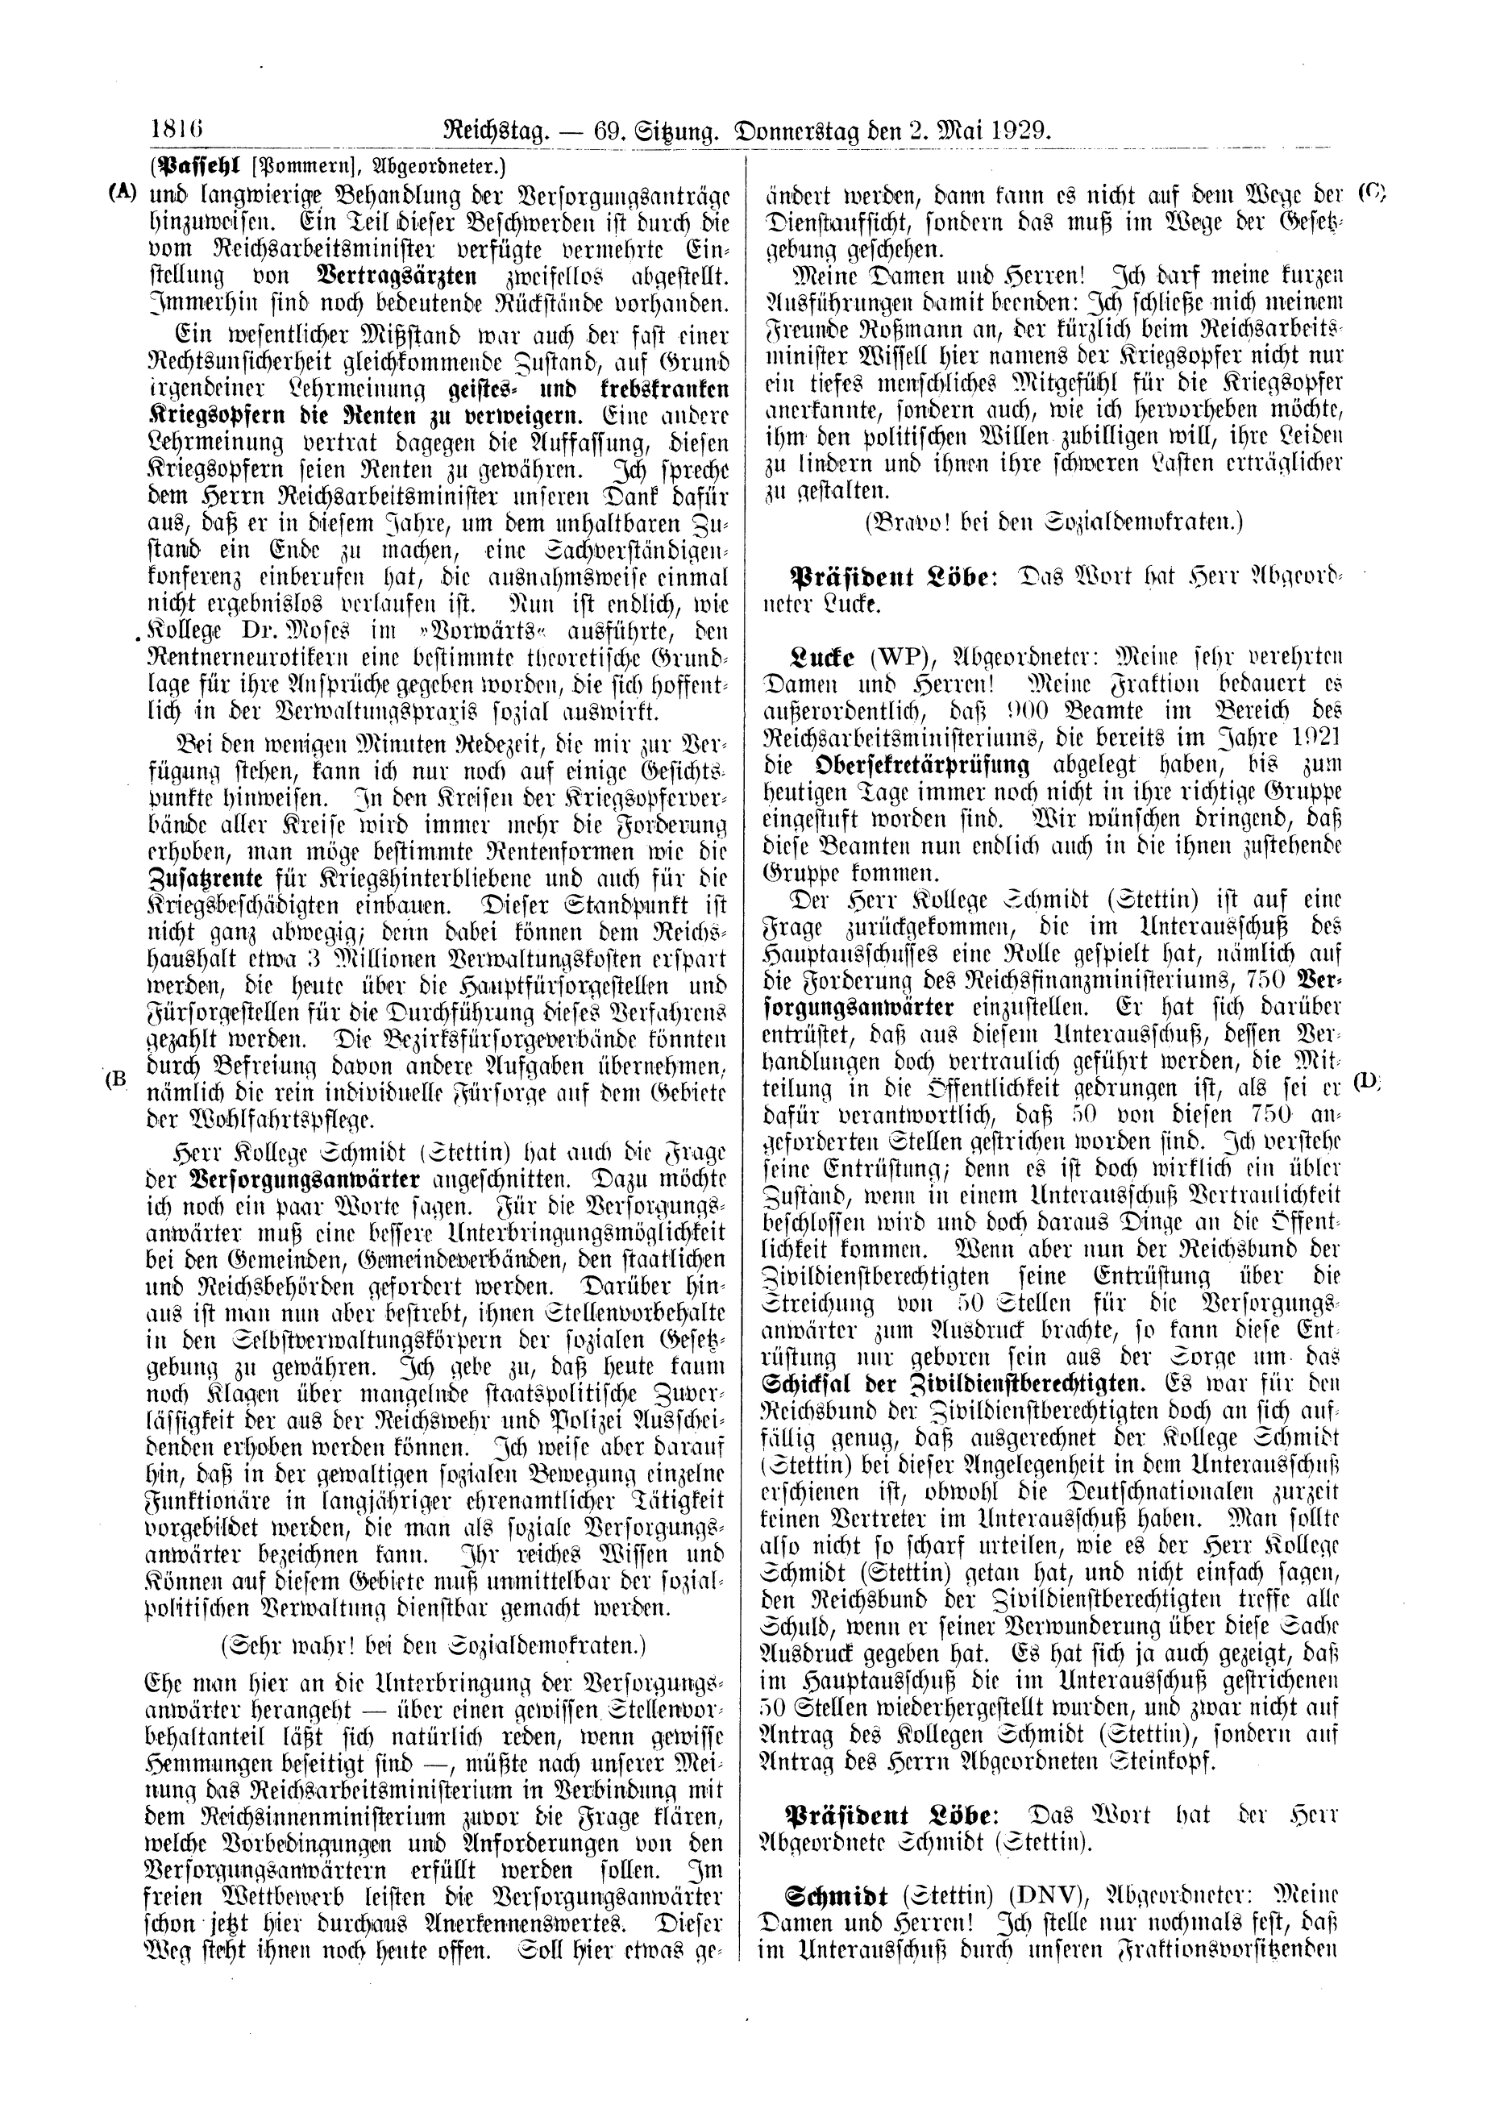 Scan of page 1816